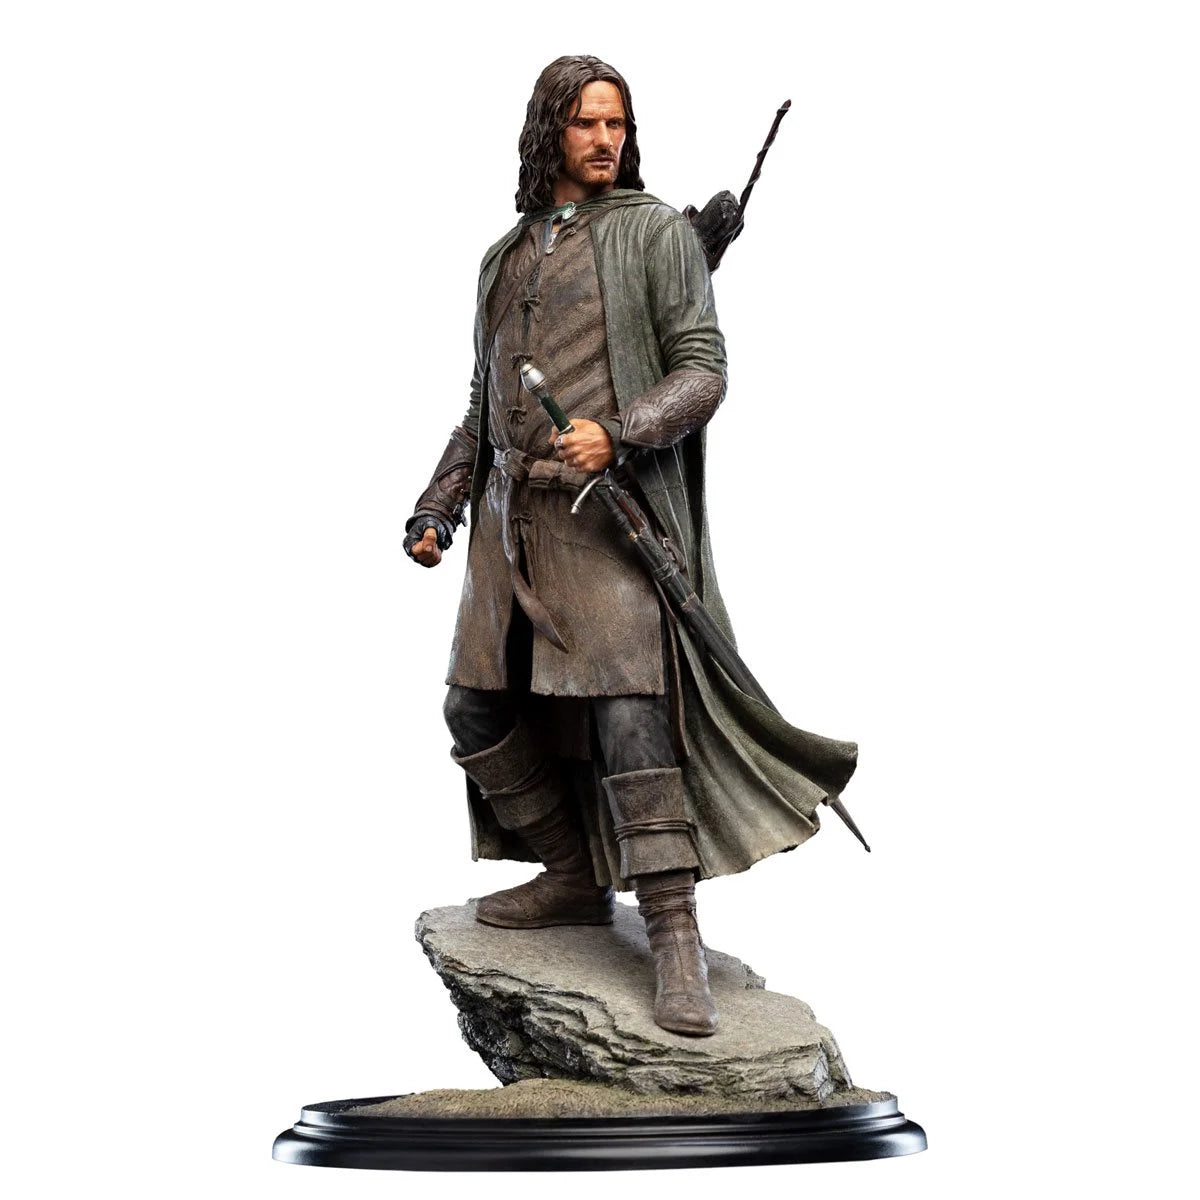 Aragorn The Lord of the Rings 1:6 Scale Statue by Weta Workshop -Weta Workshop - India - www.superherotoystore.com